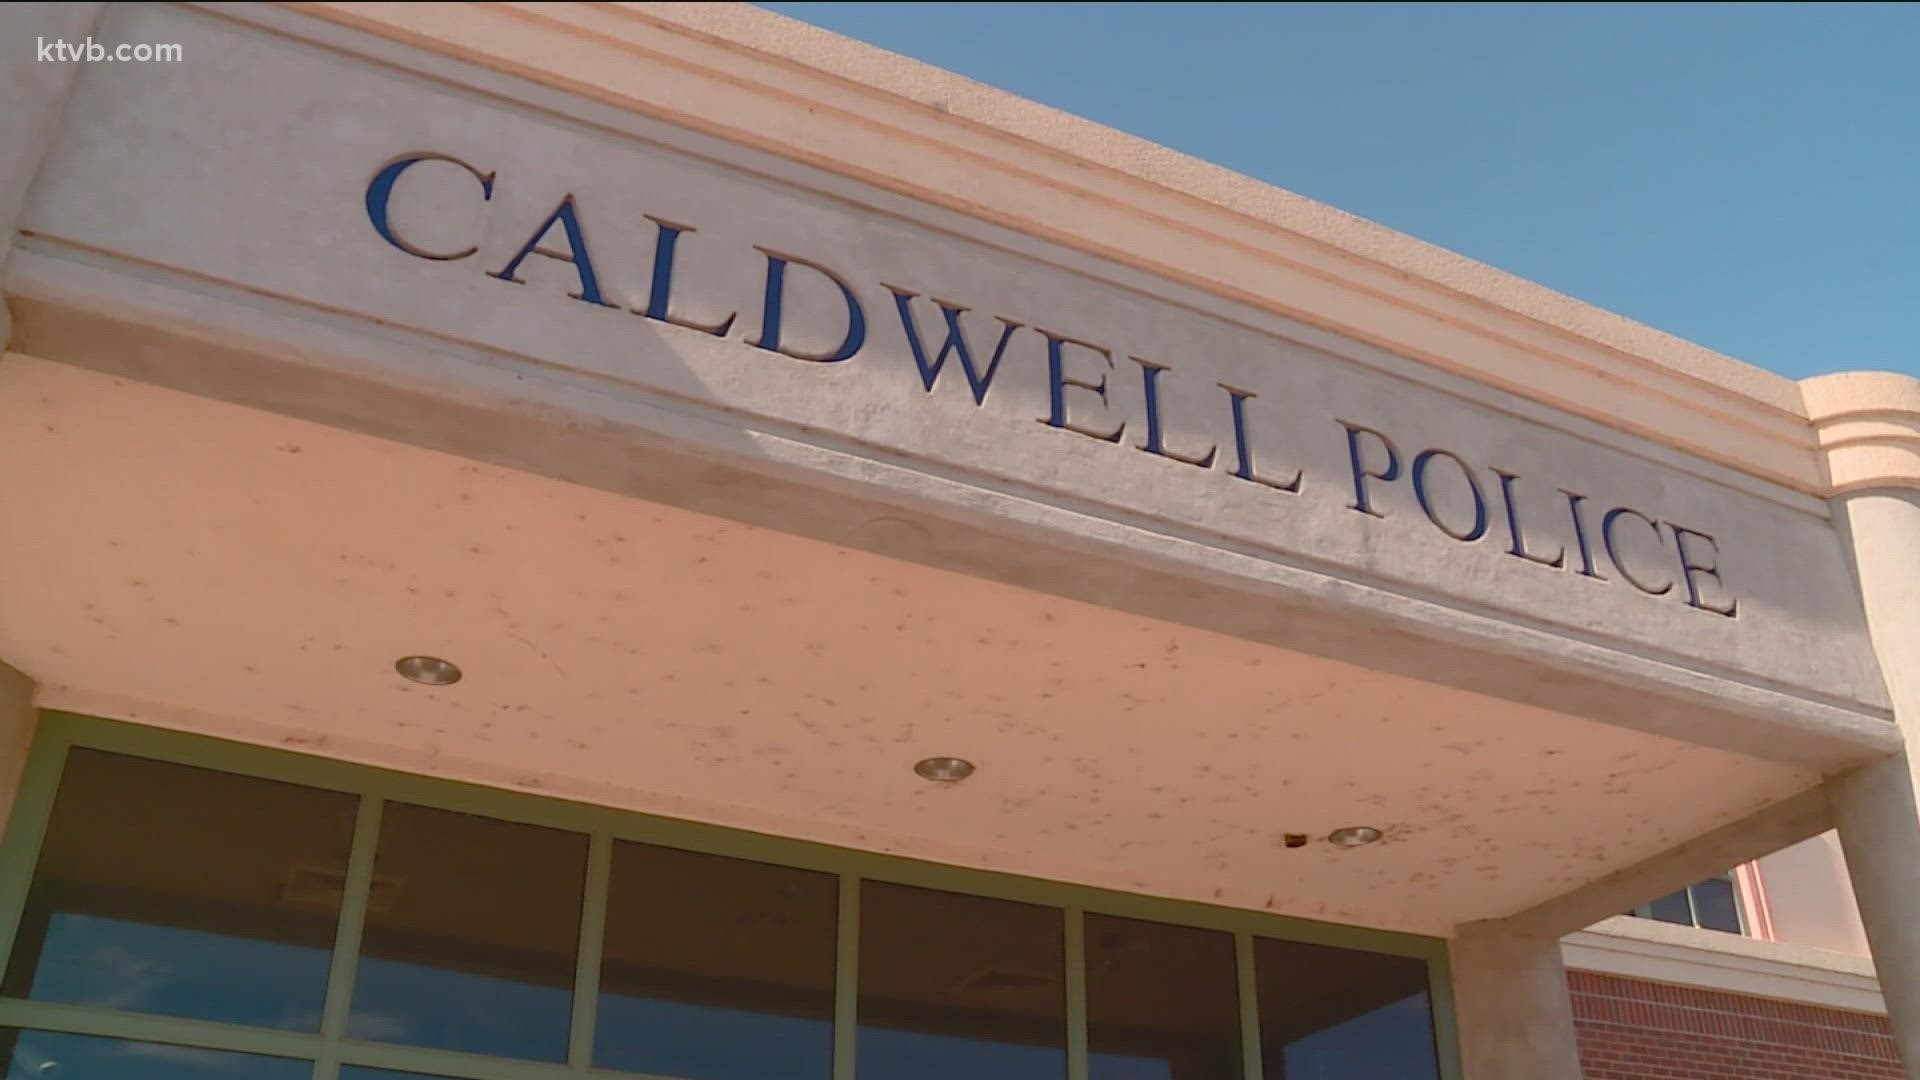 A City of Caldwell news release Tuesday stated that it is expected the council will present Rex Ingram for the position at its June 20 meeting.